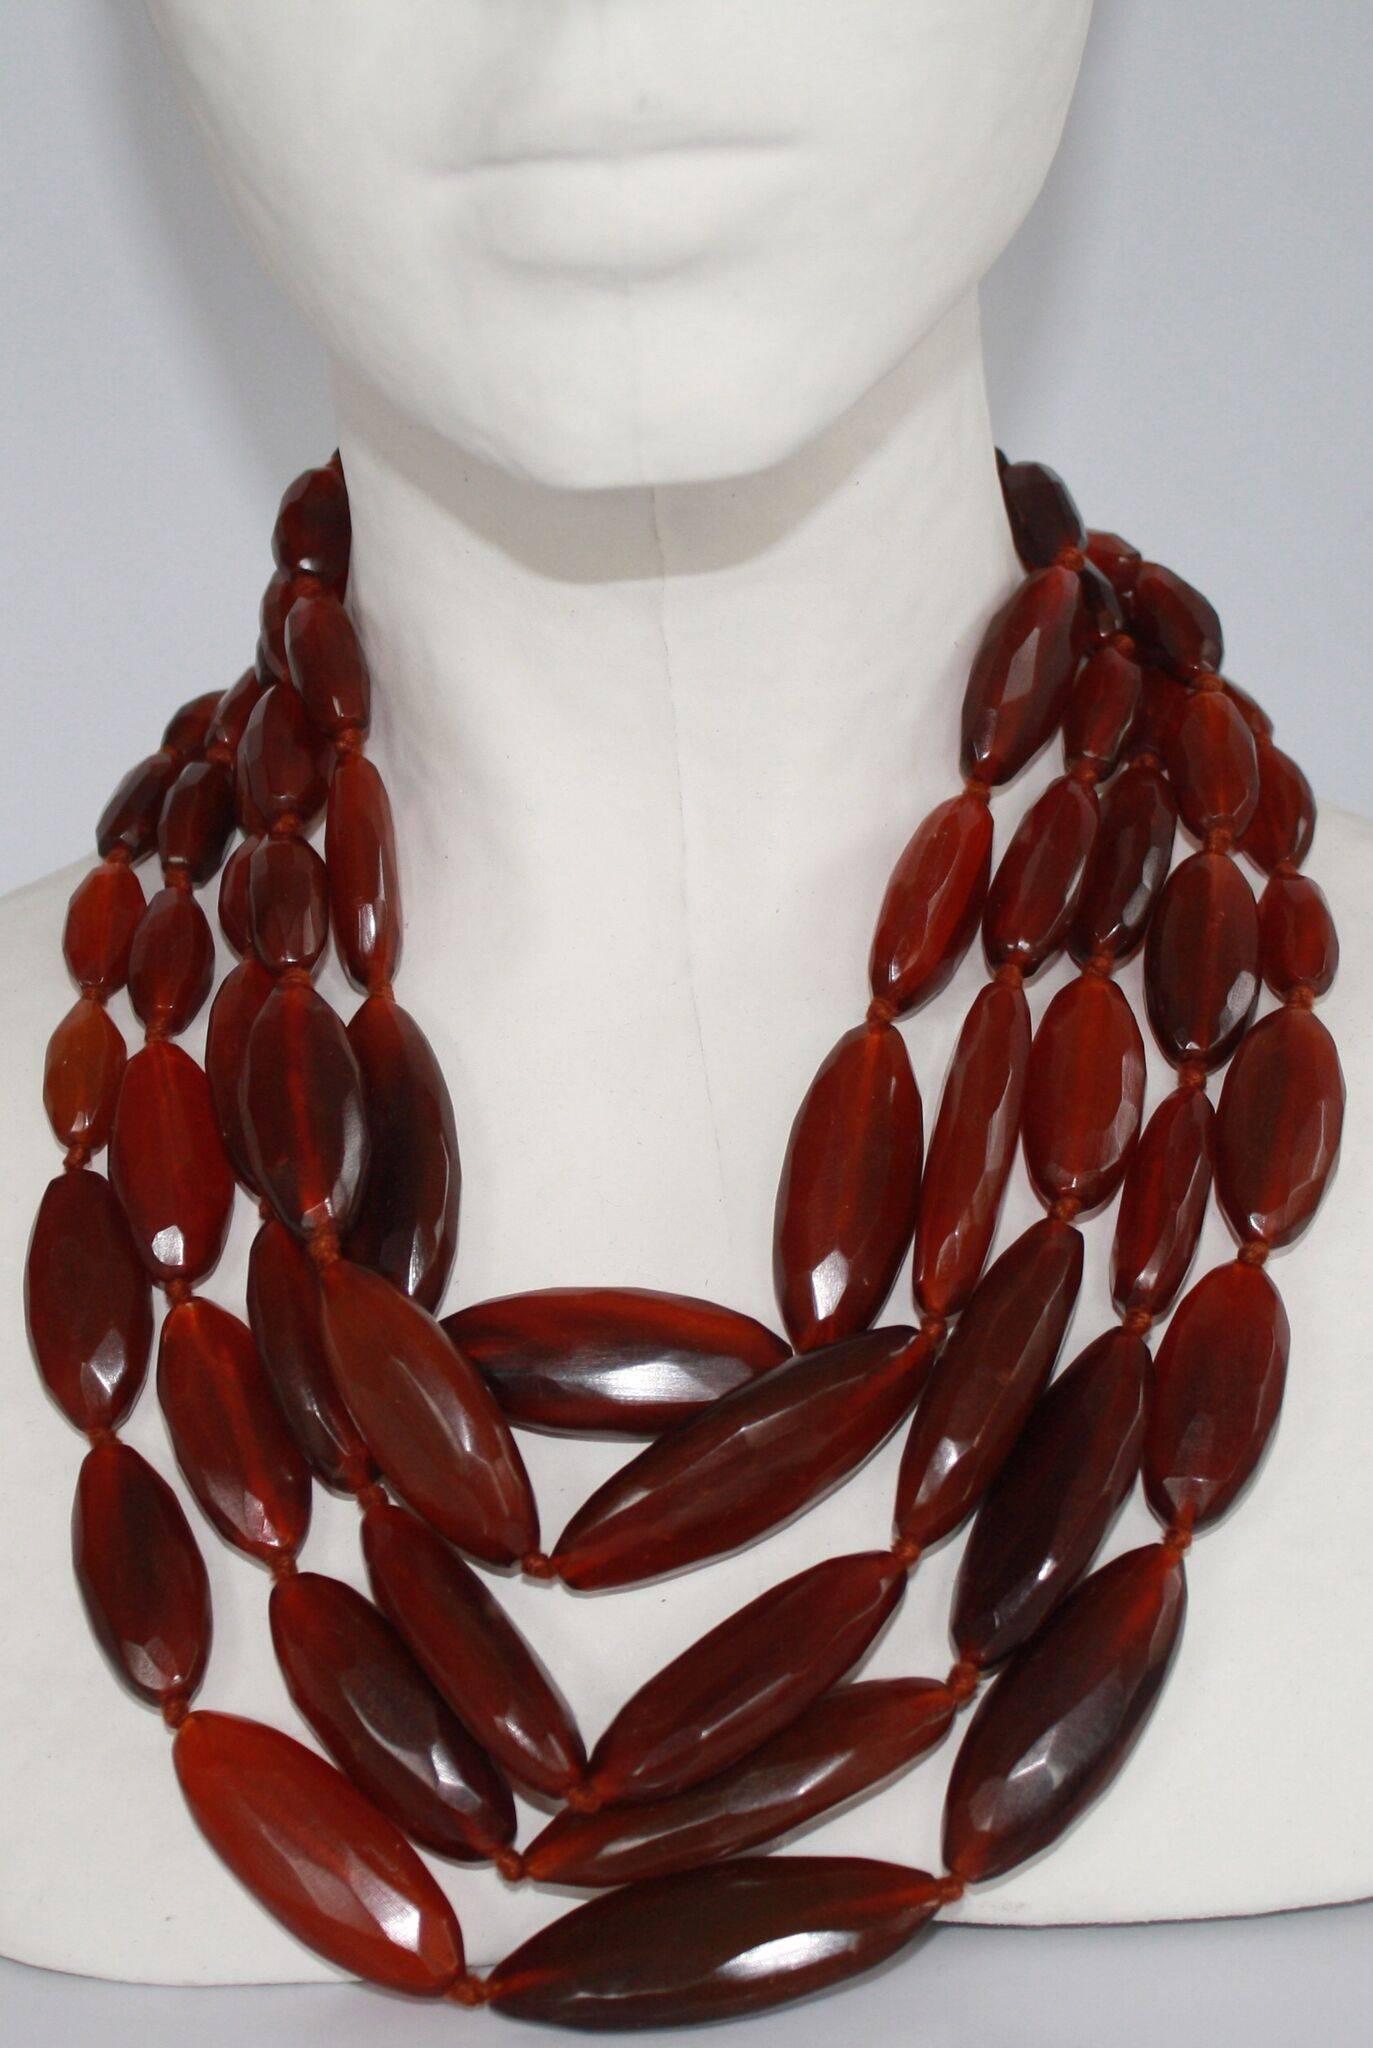 Five strand necklace from Danish designer Monies. Made with red horn. Lightweight and smooth on the skin. 